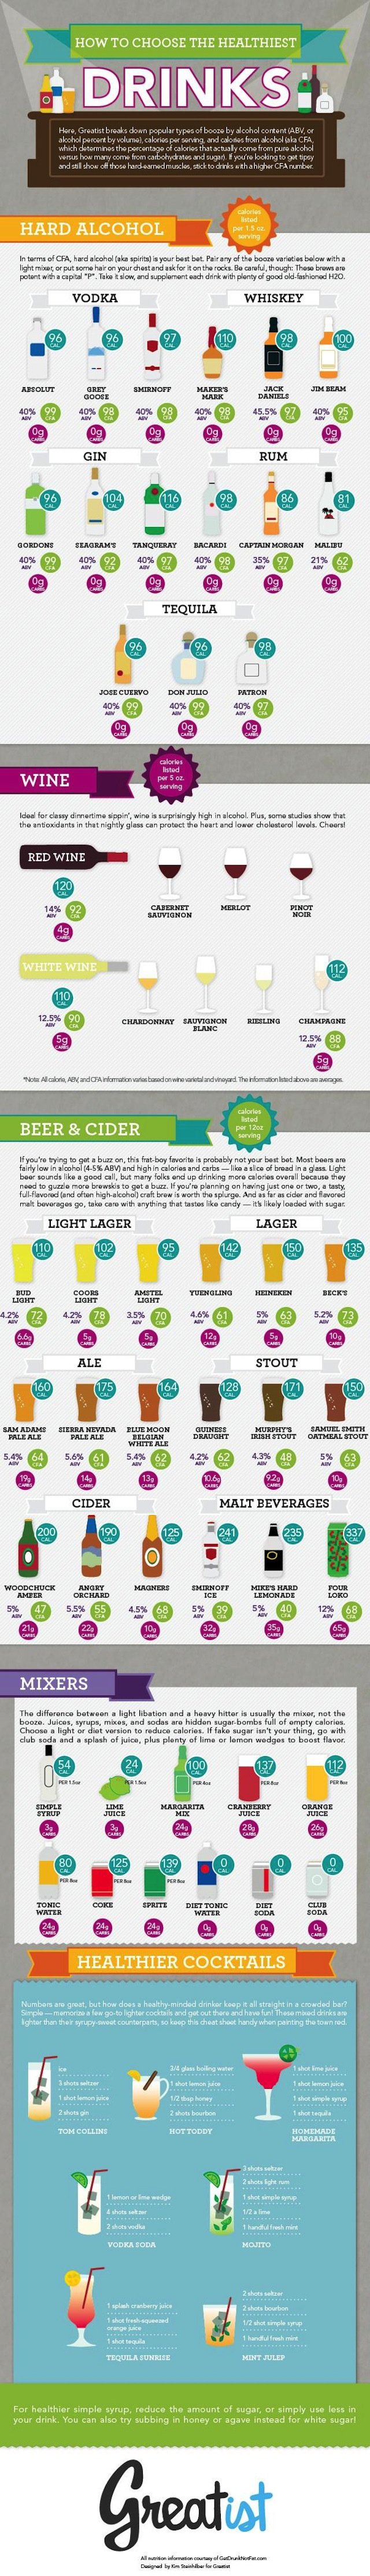 How To Choose The Healthiest Beer Wine And Cocktails